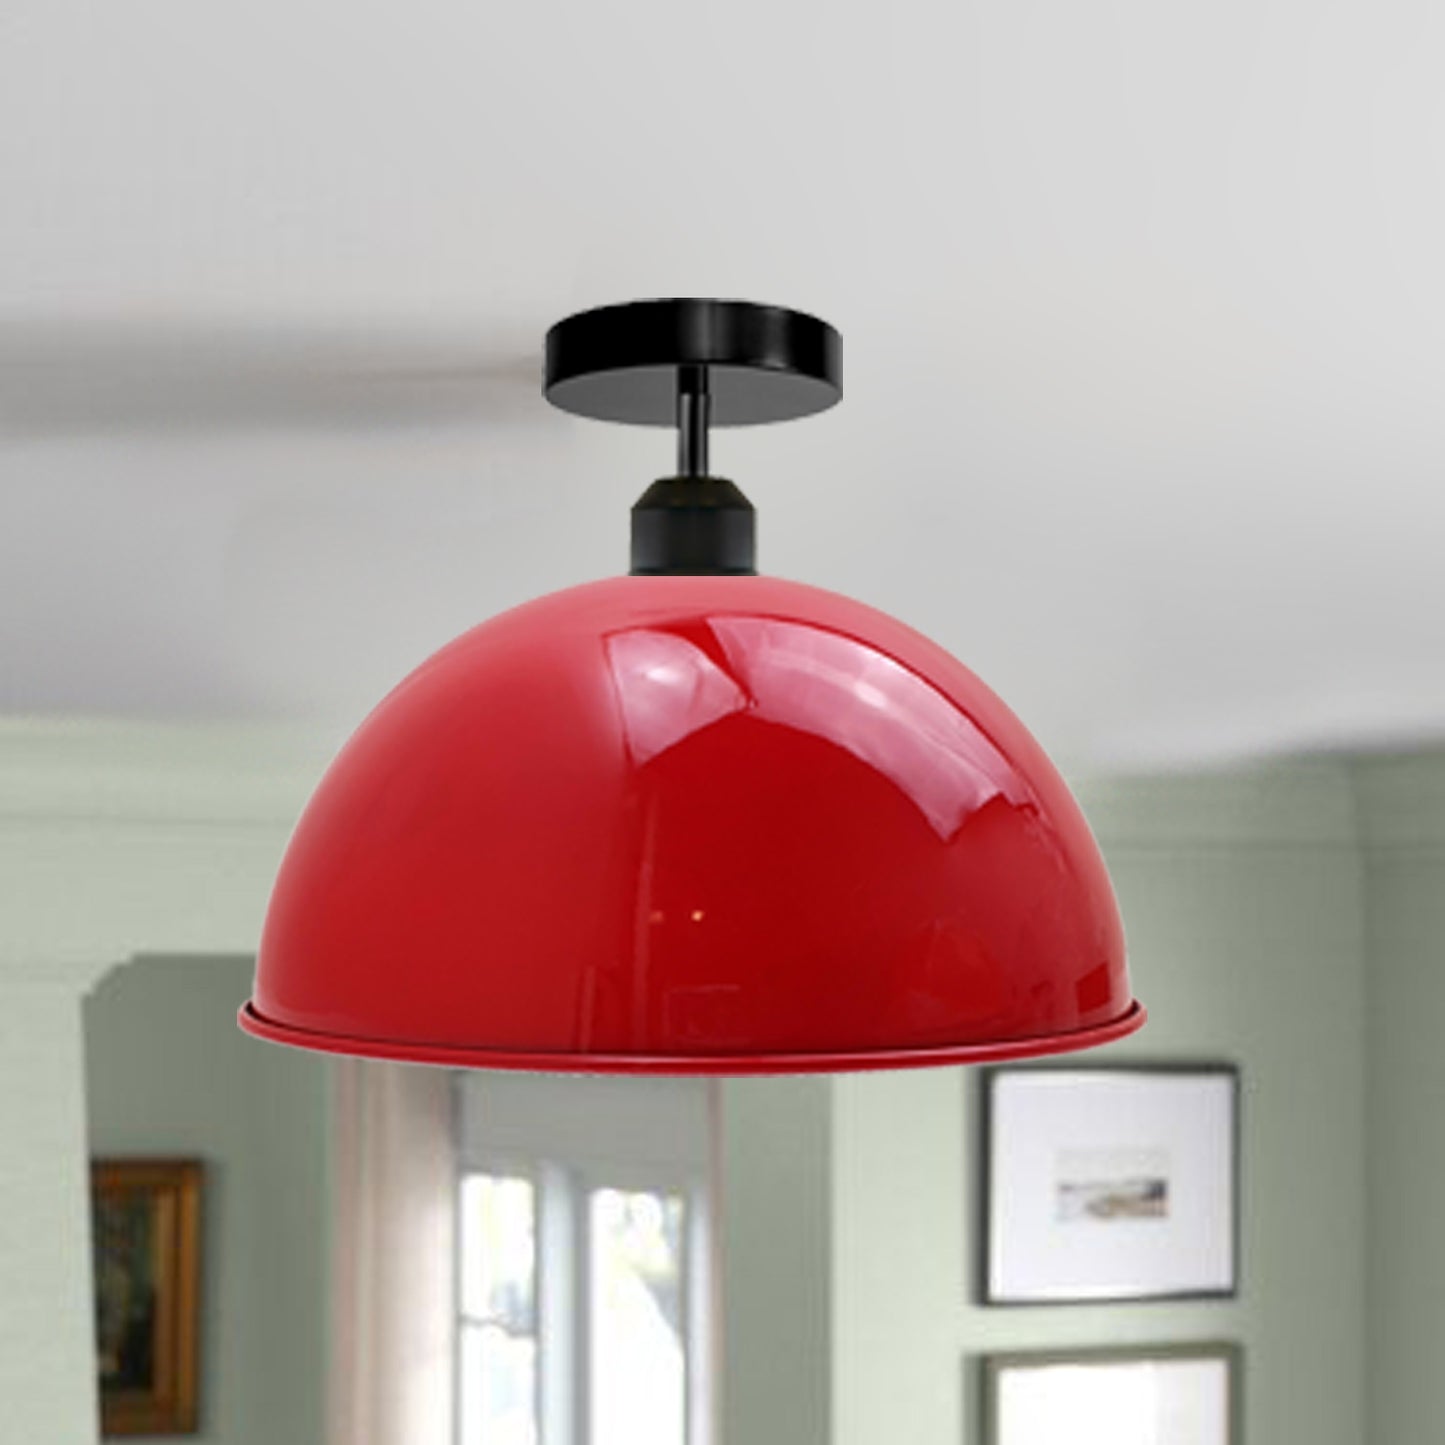 Retro Industrial vintage style Dome Shade ceiling light Red~2191